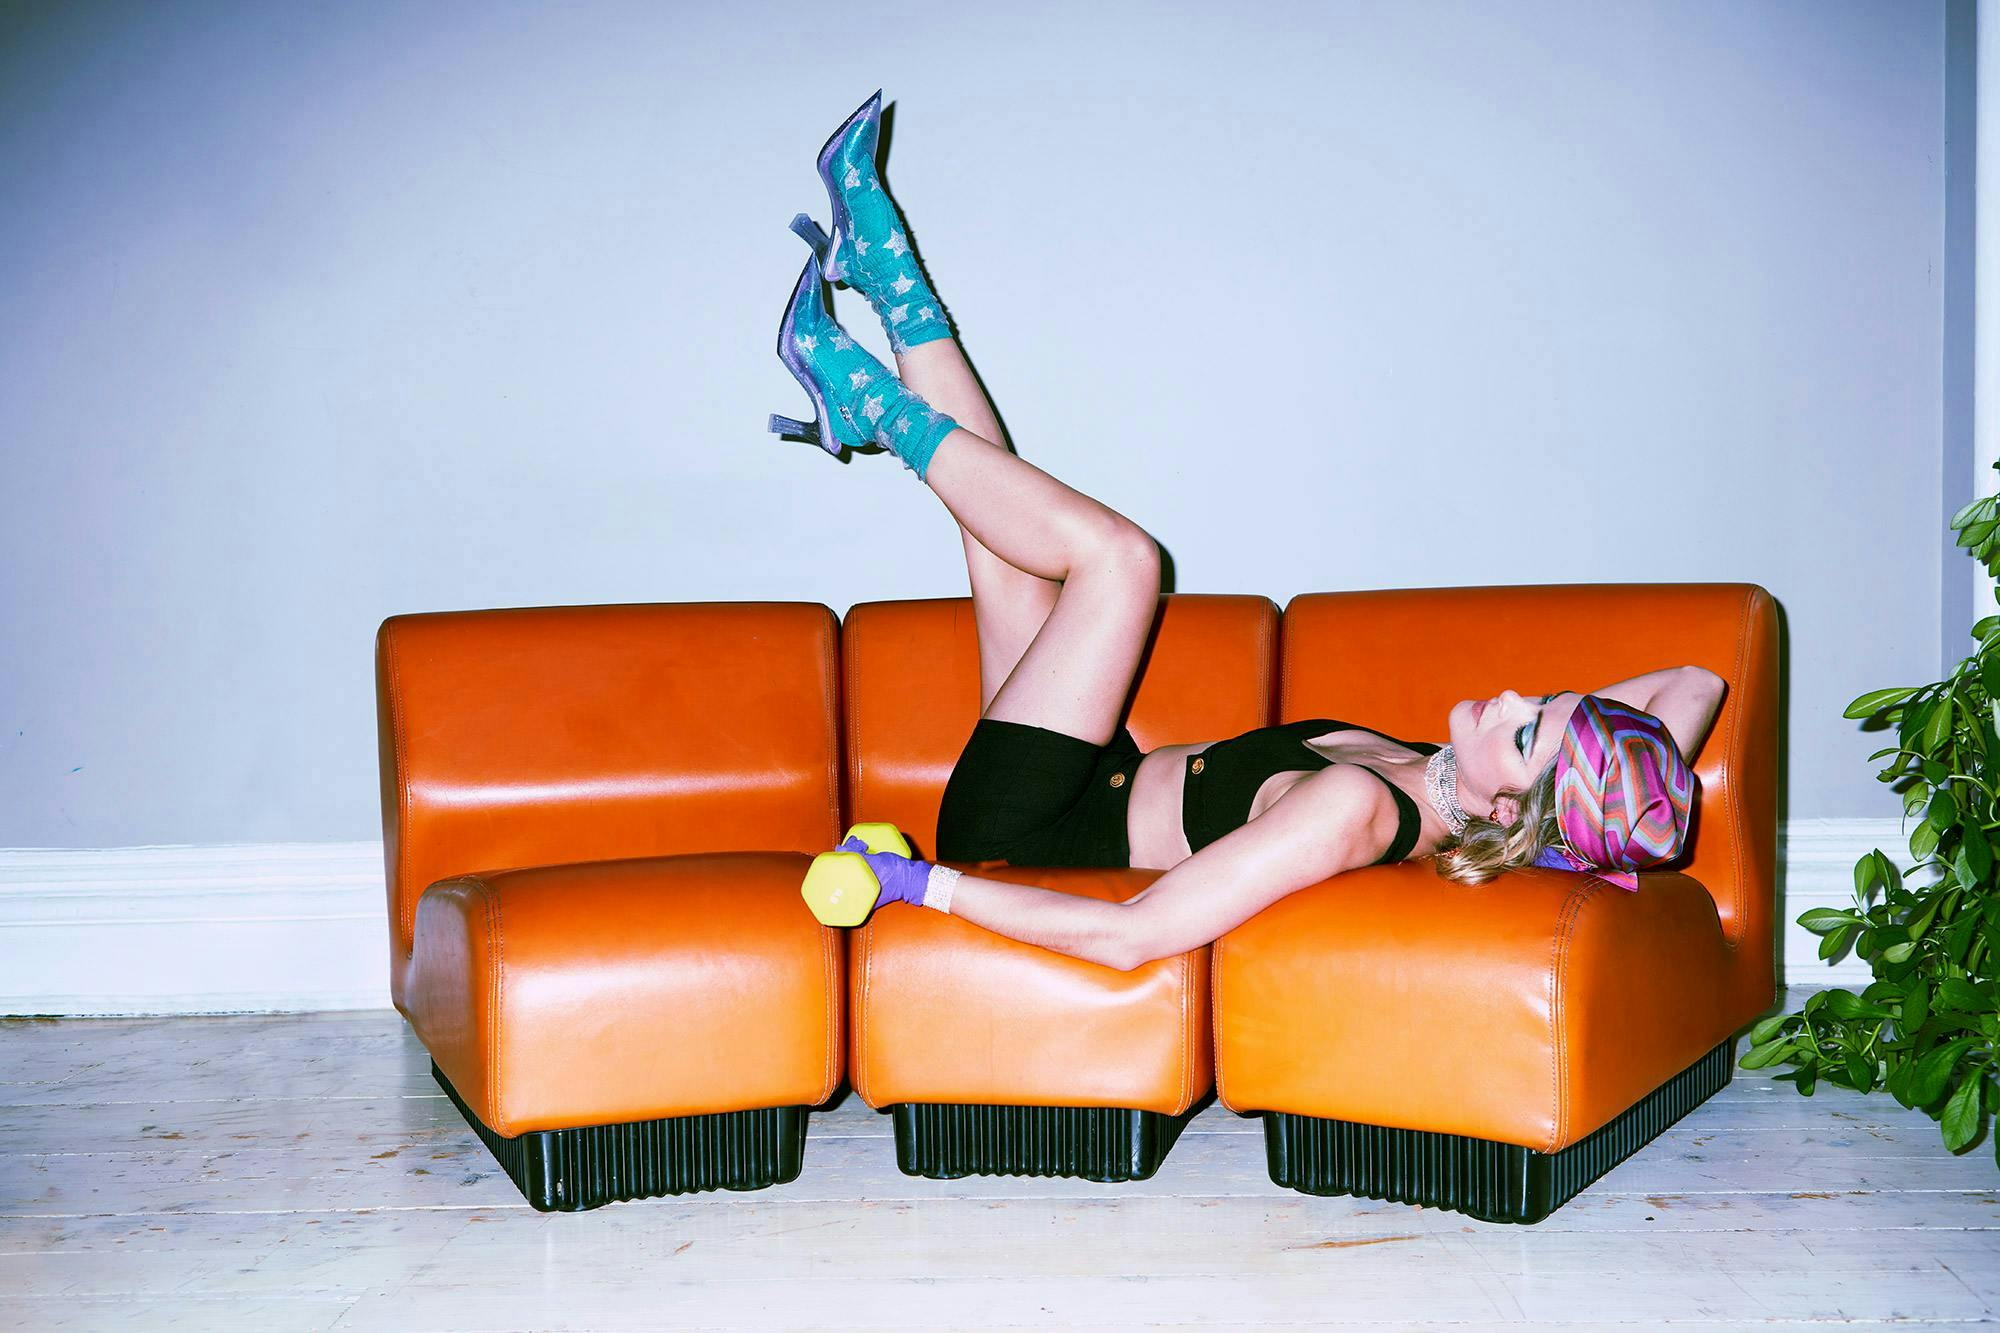 Woman lays on orange couch wearing black sports bra and biker shorts with blue ankle socks and blue Melissa x Larroudé Slingback Heels 